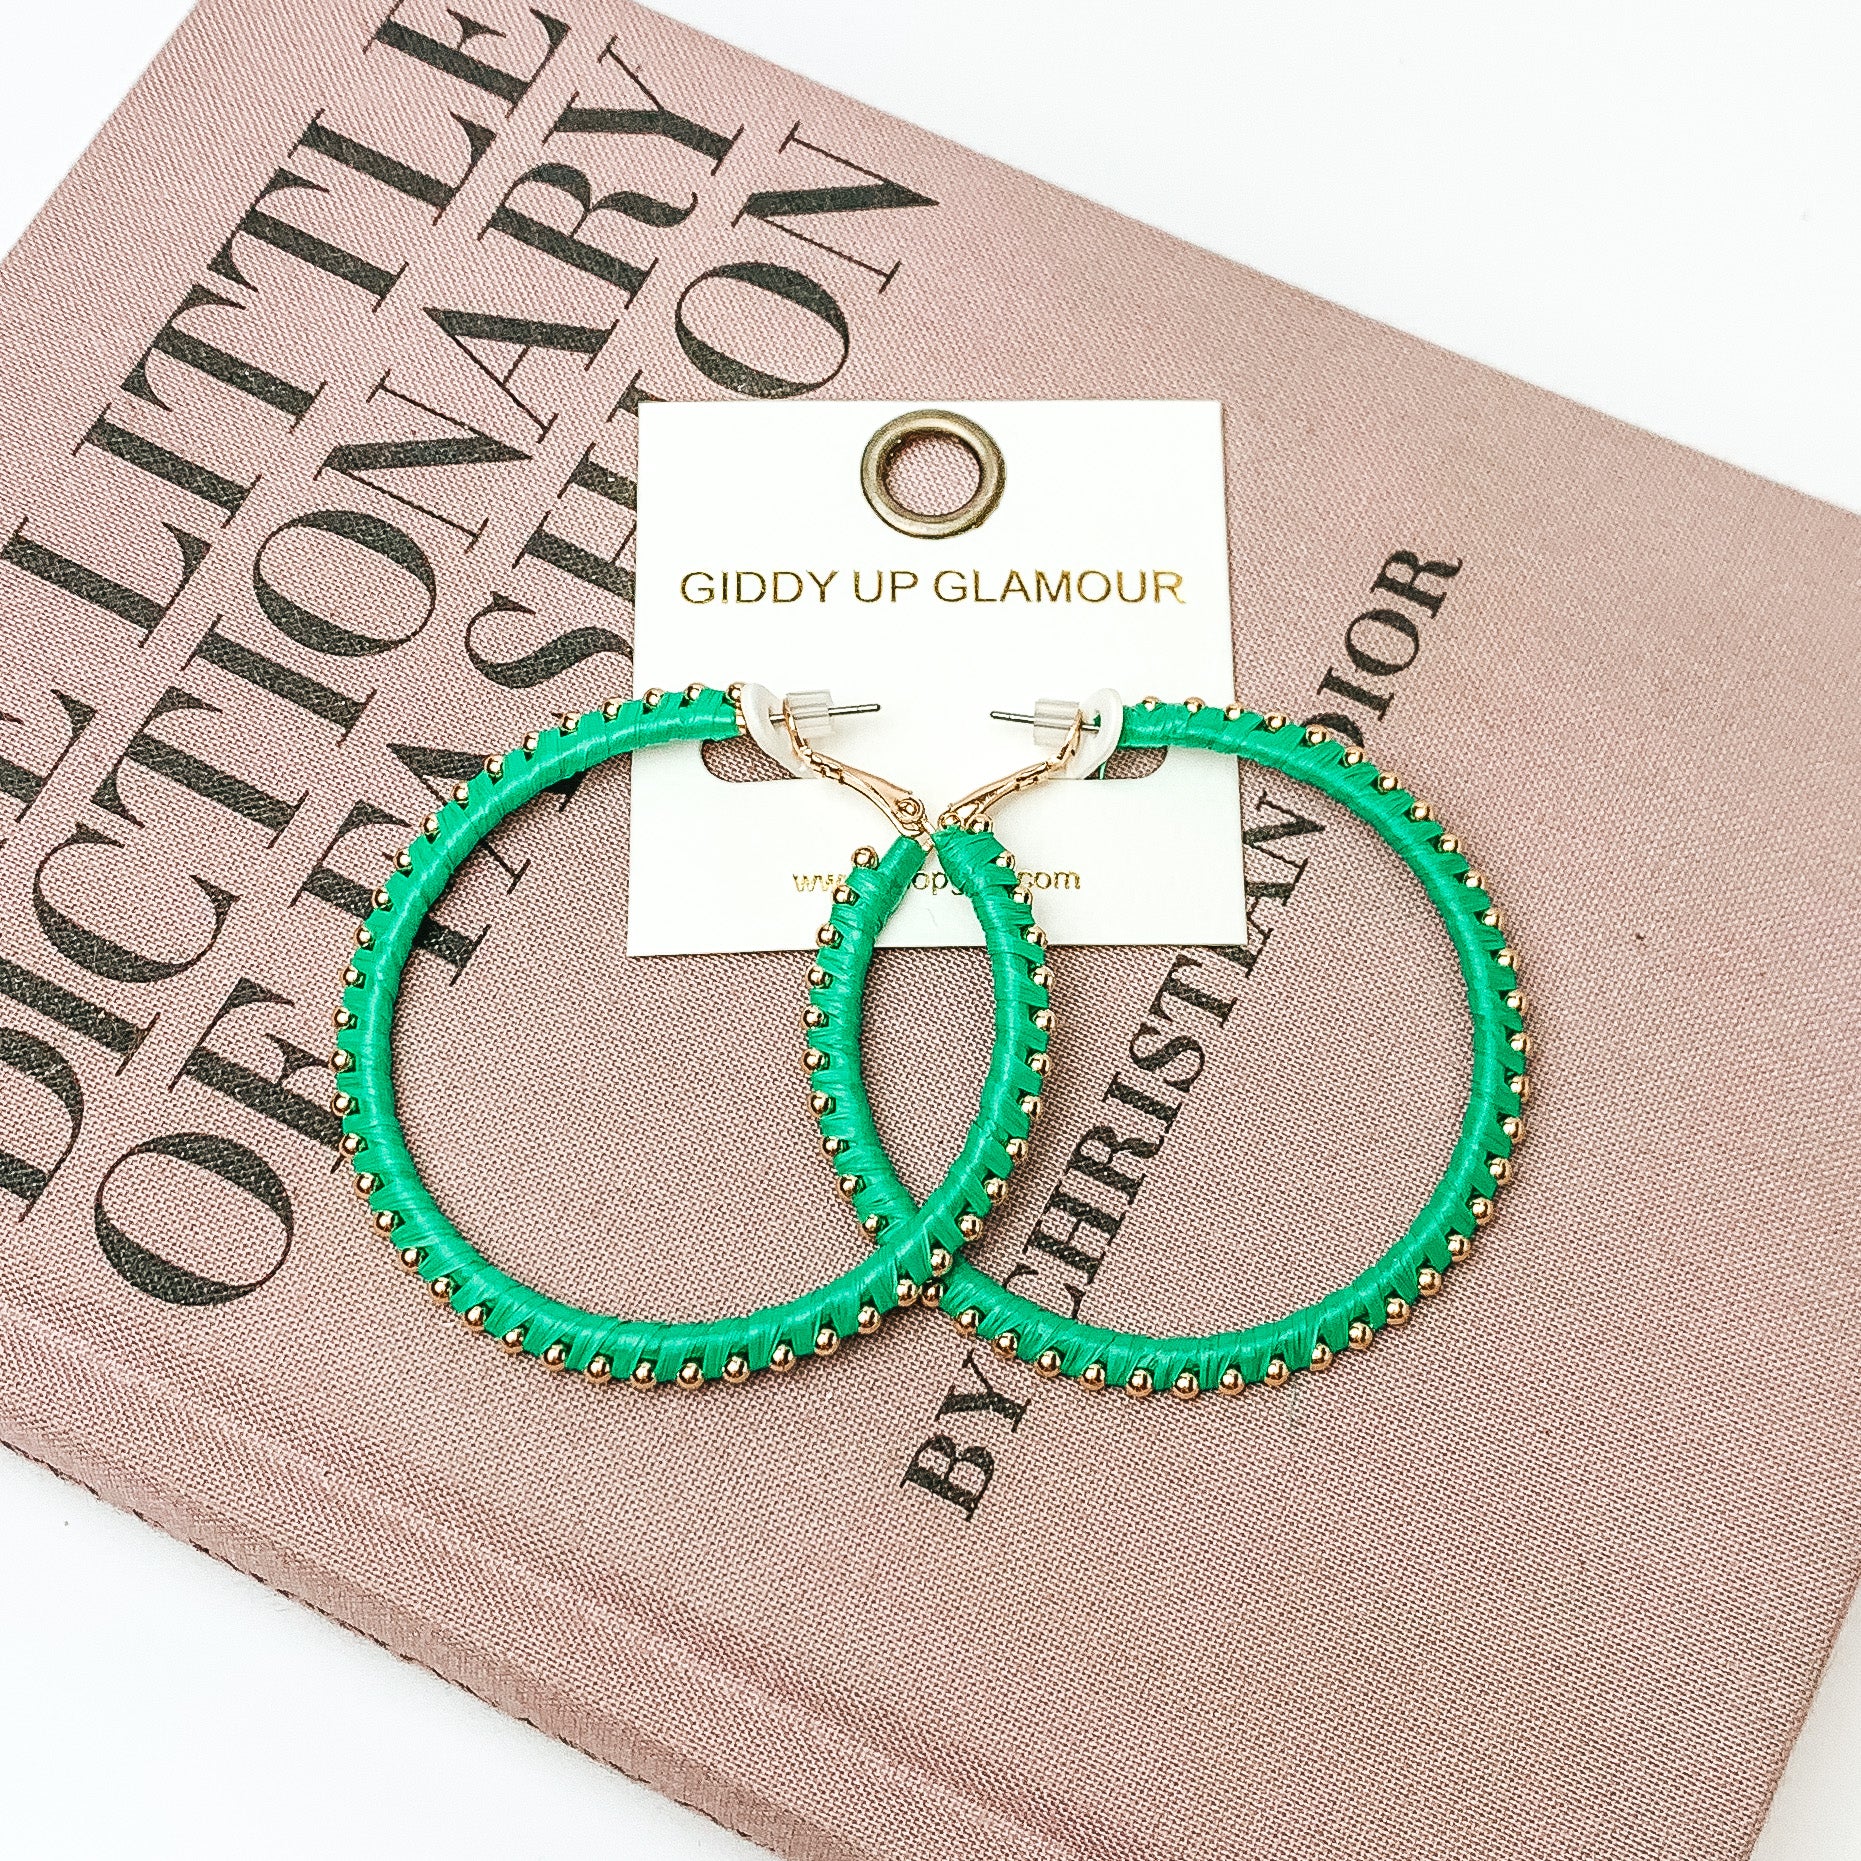 Pictured are circle green hoop earrings with gold beades around it. They are pictured with a pink fashion journal on a white background.